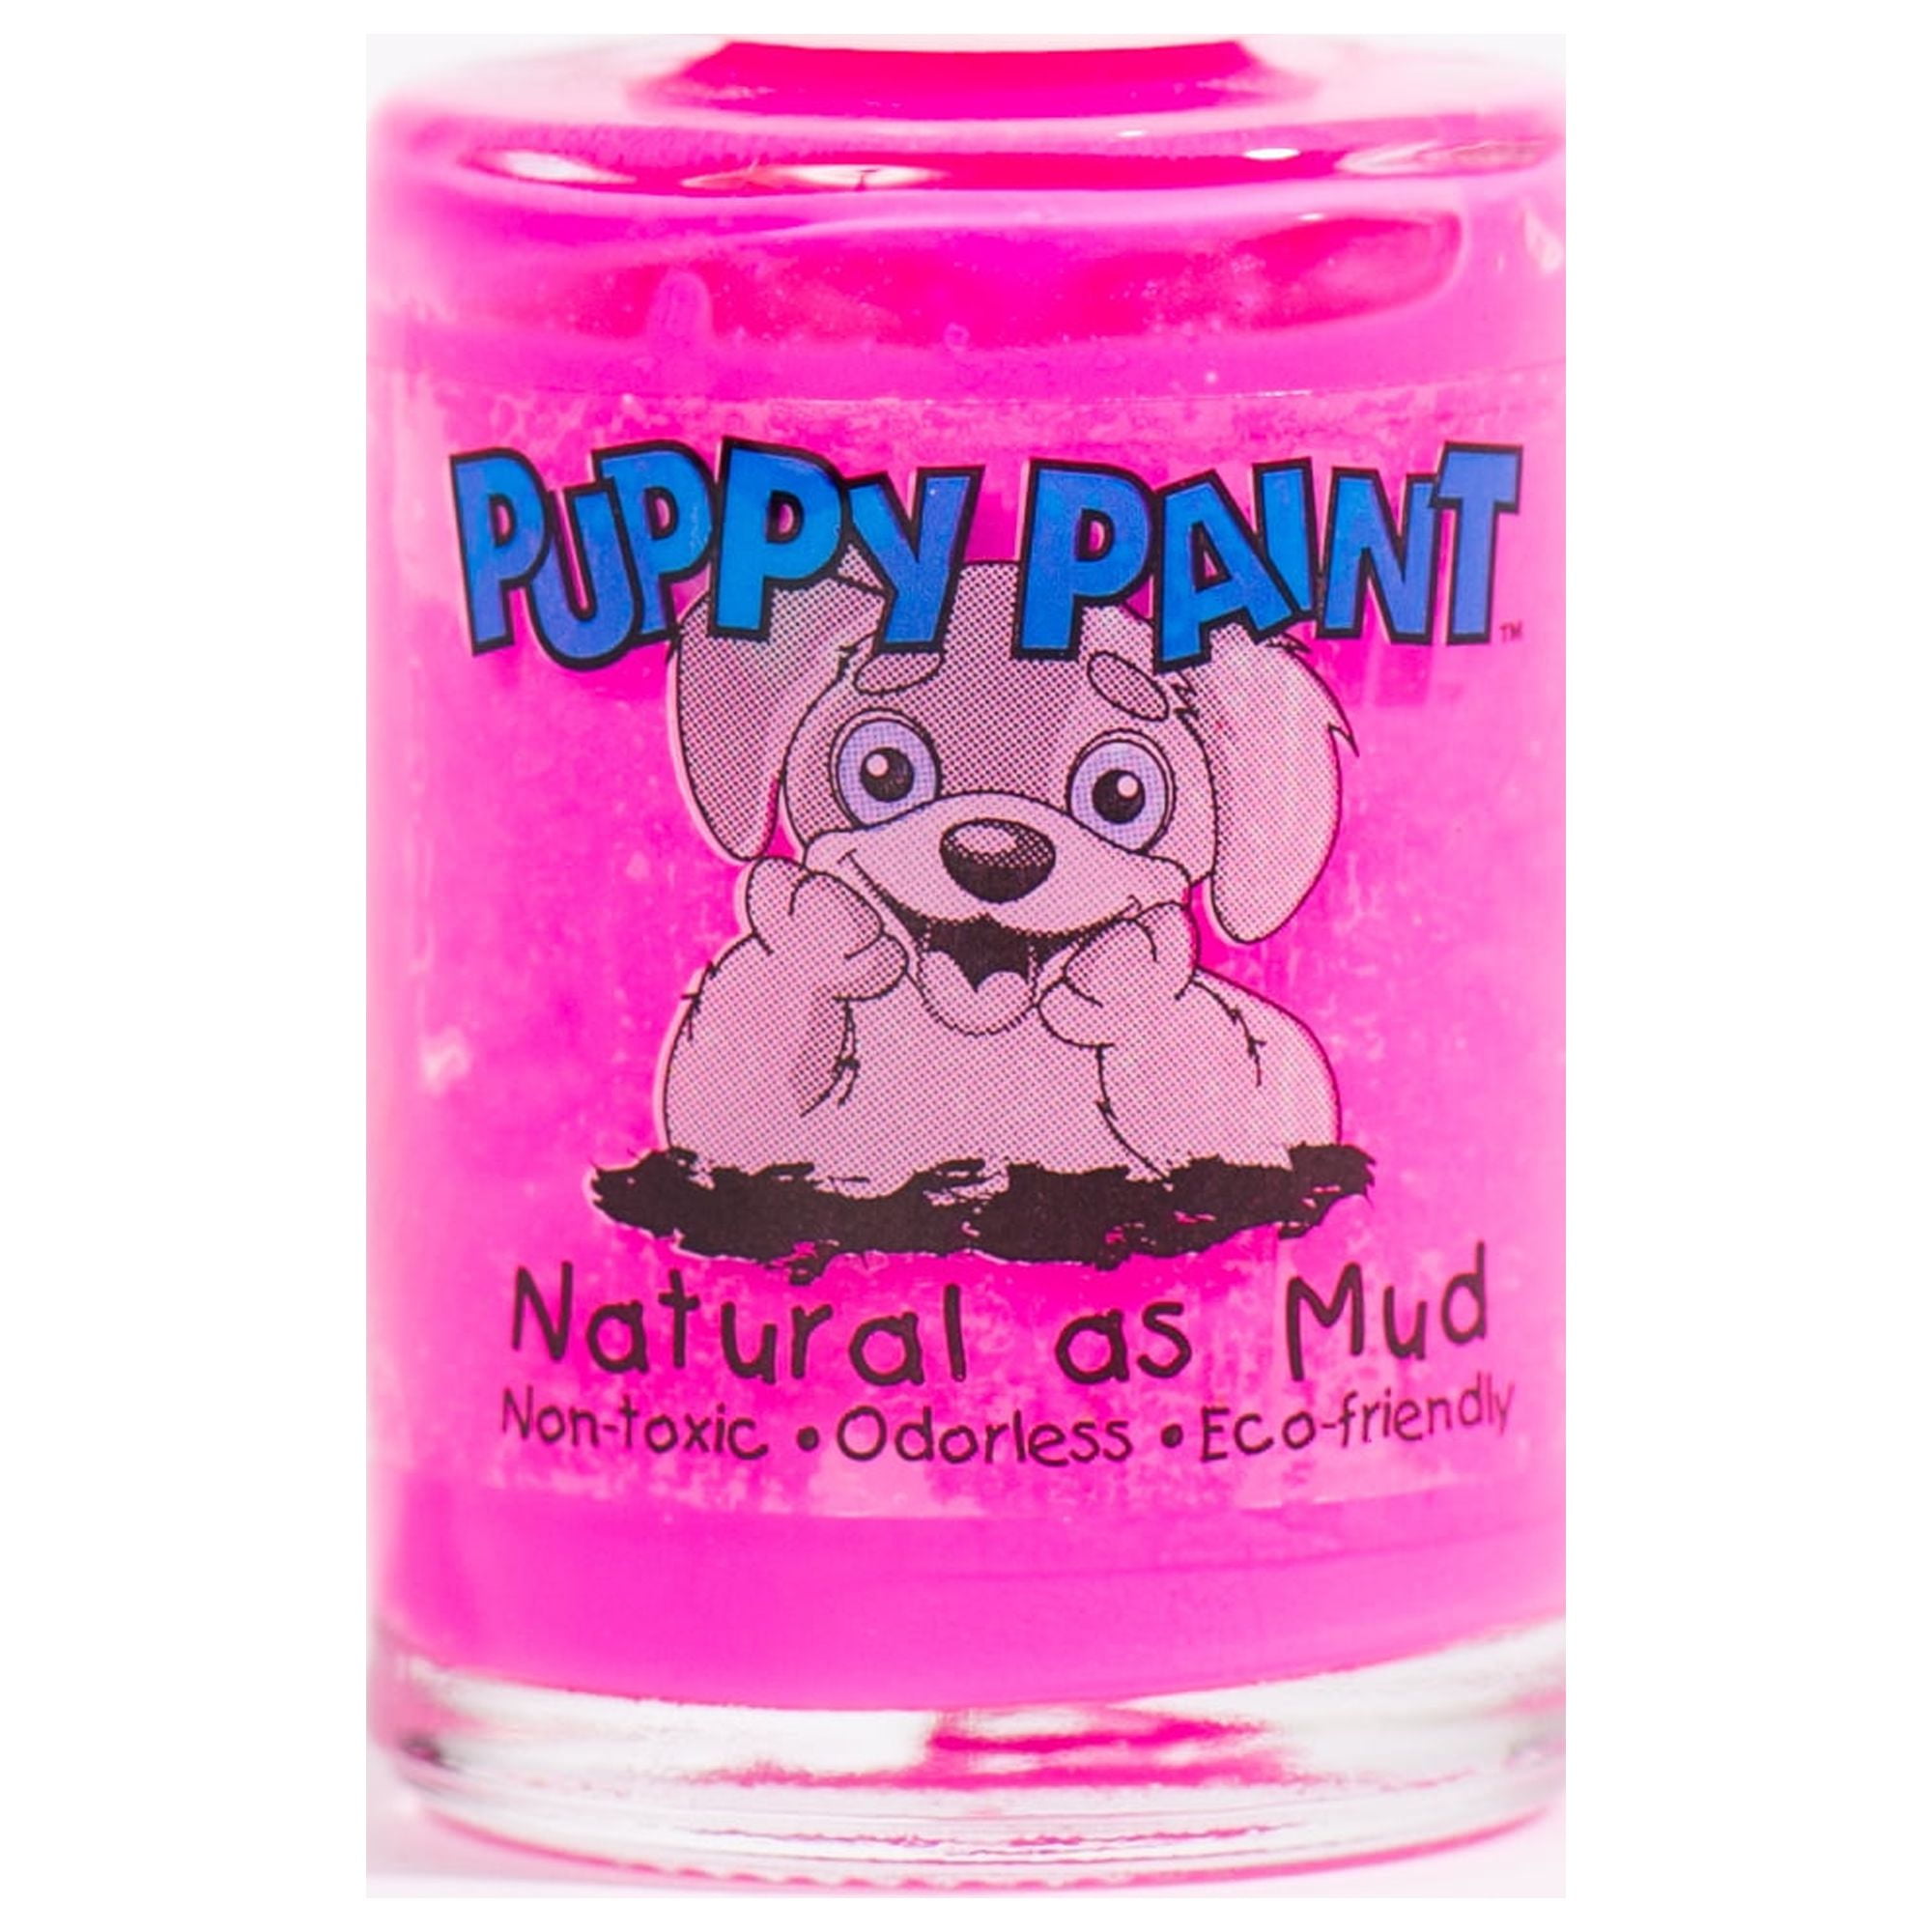 Piggy Paint Puppy Paint Variety Pack Dog Nail Polish & Remover, 0.5-oz Bottle, 3 Count